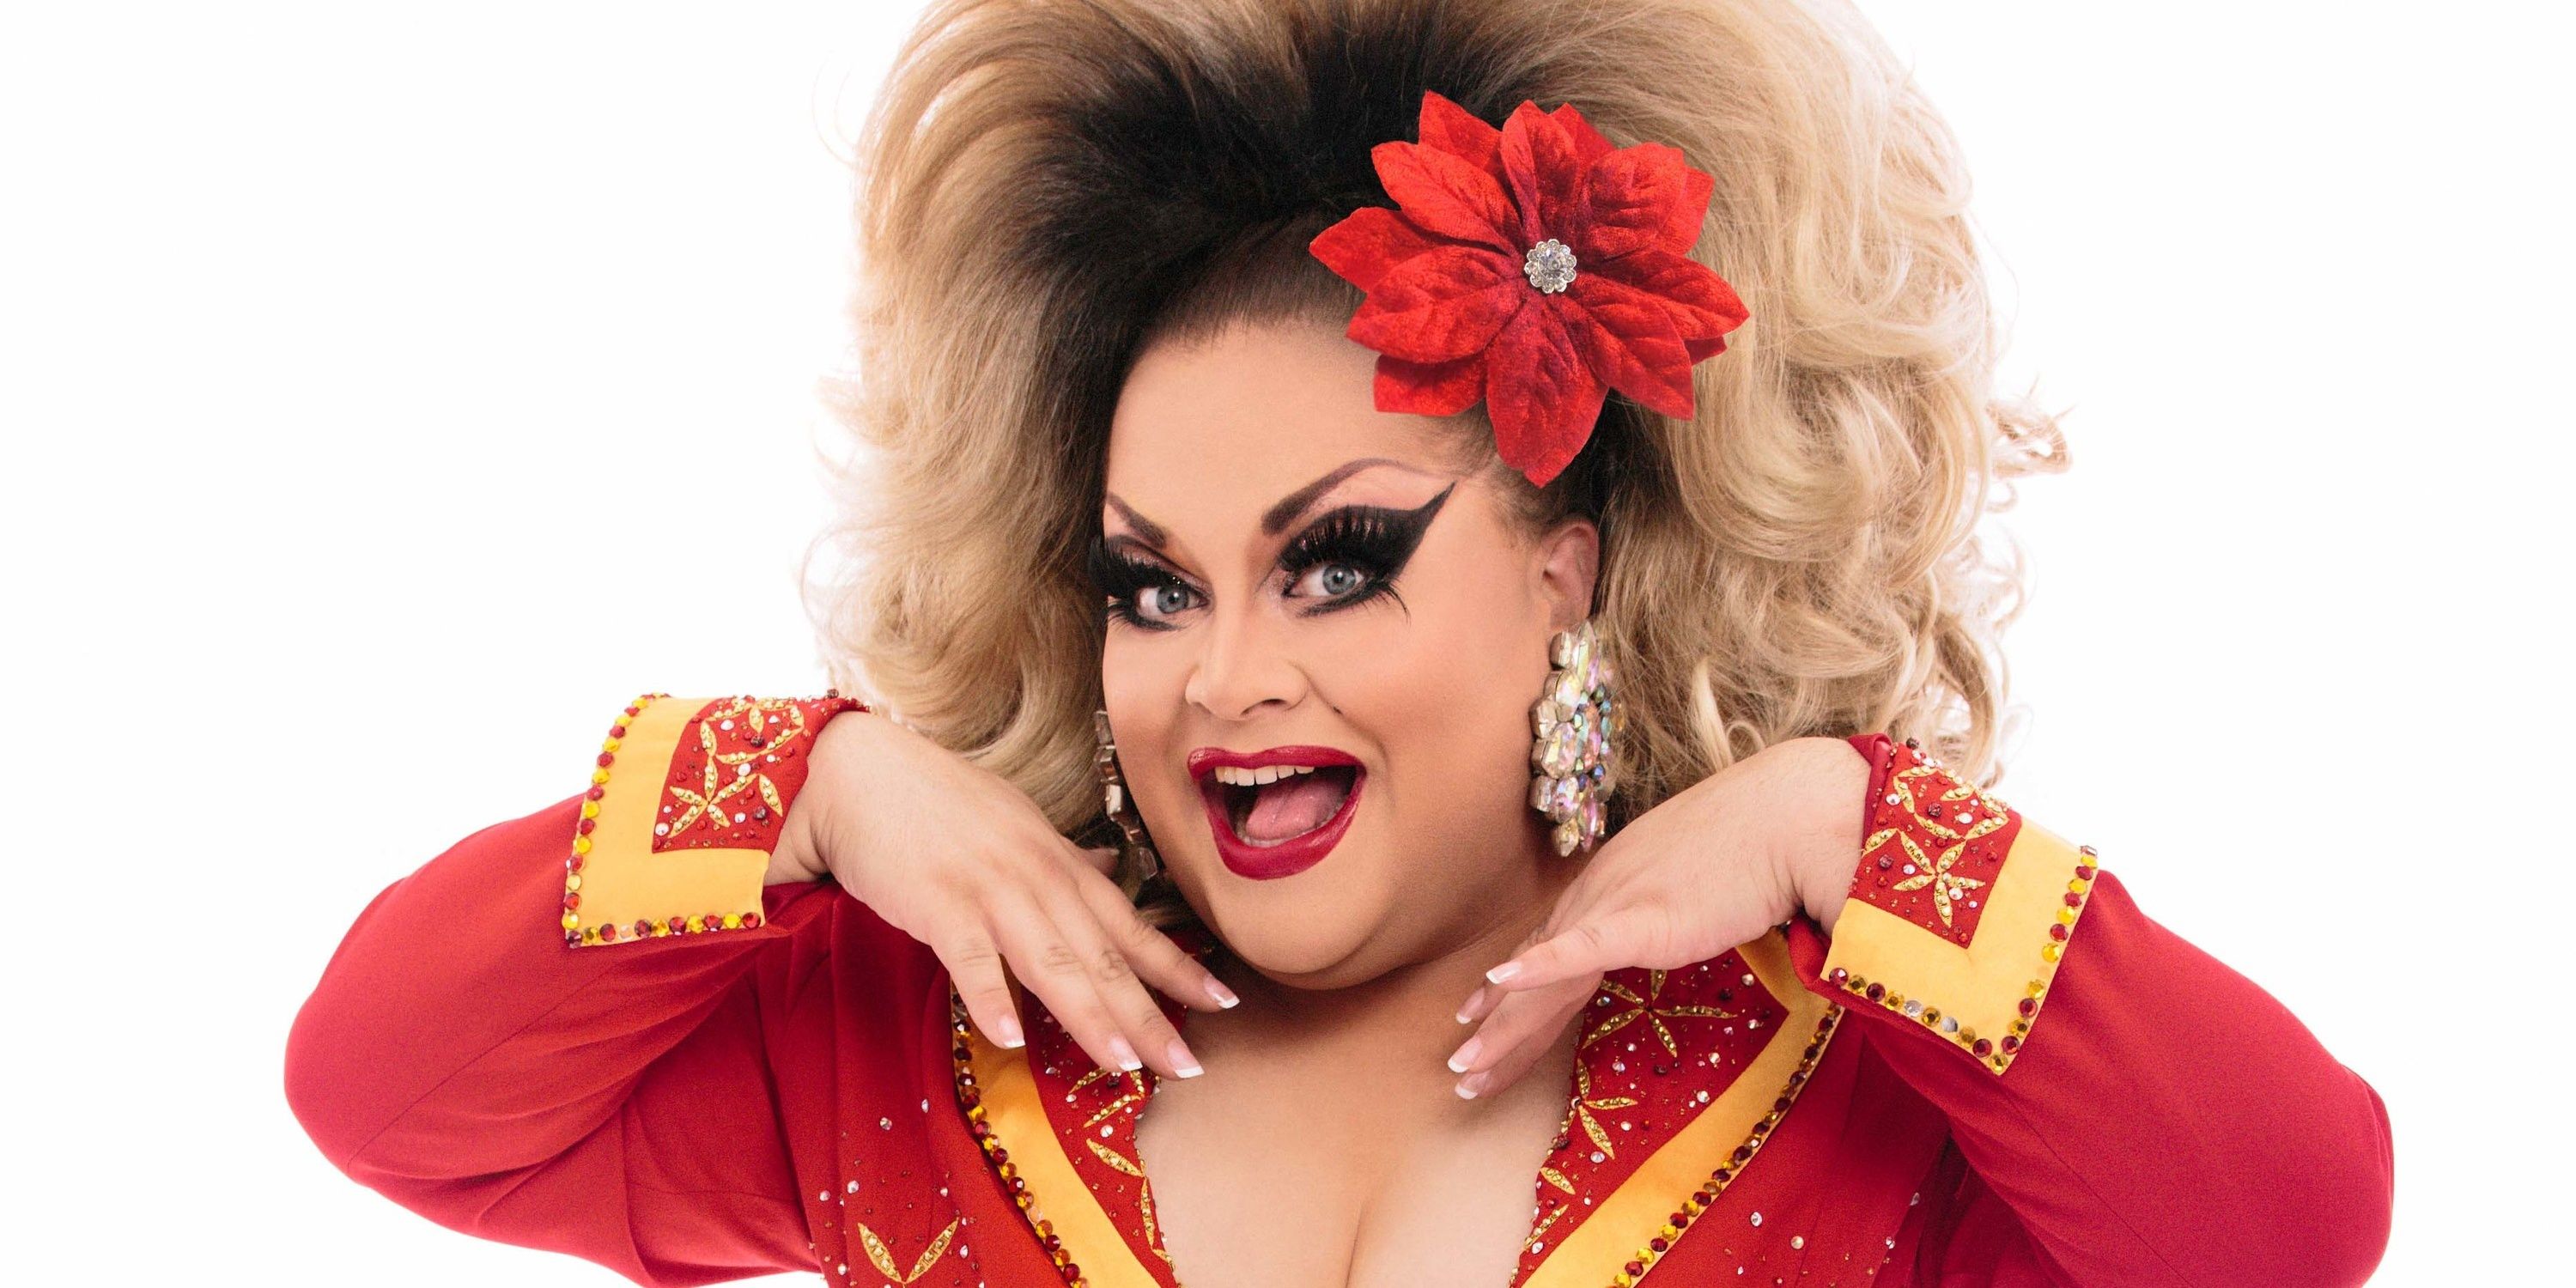 Ginger Minj smiles and poses for a photo